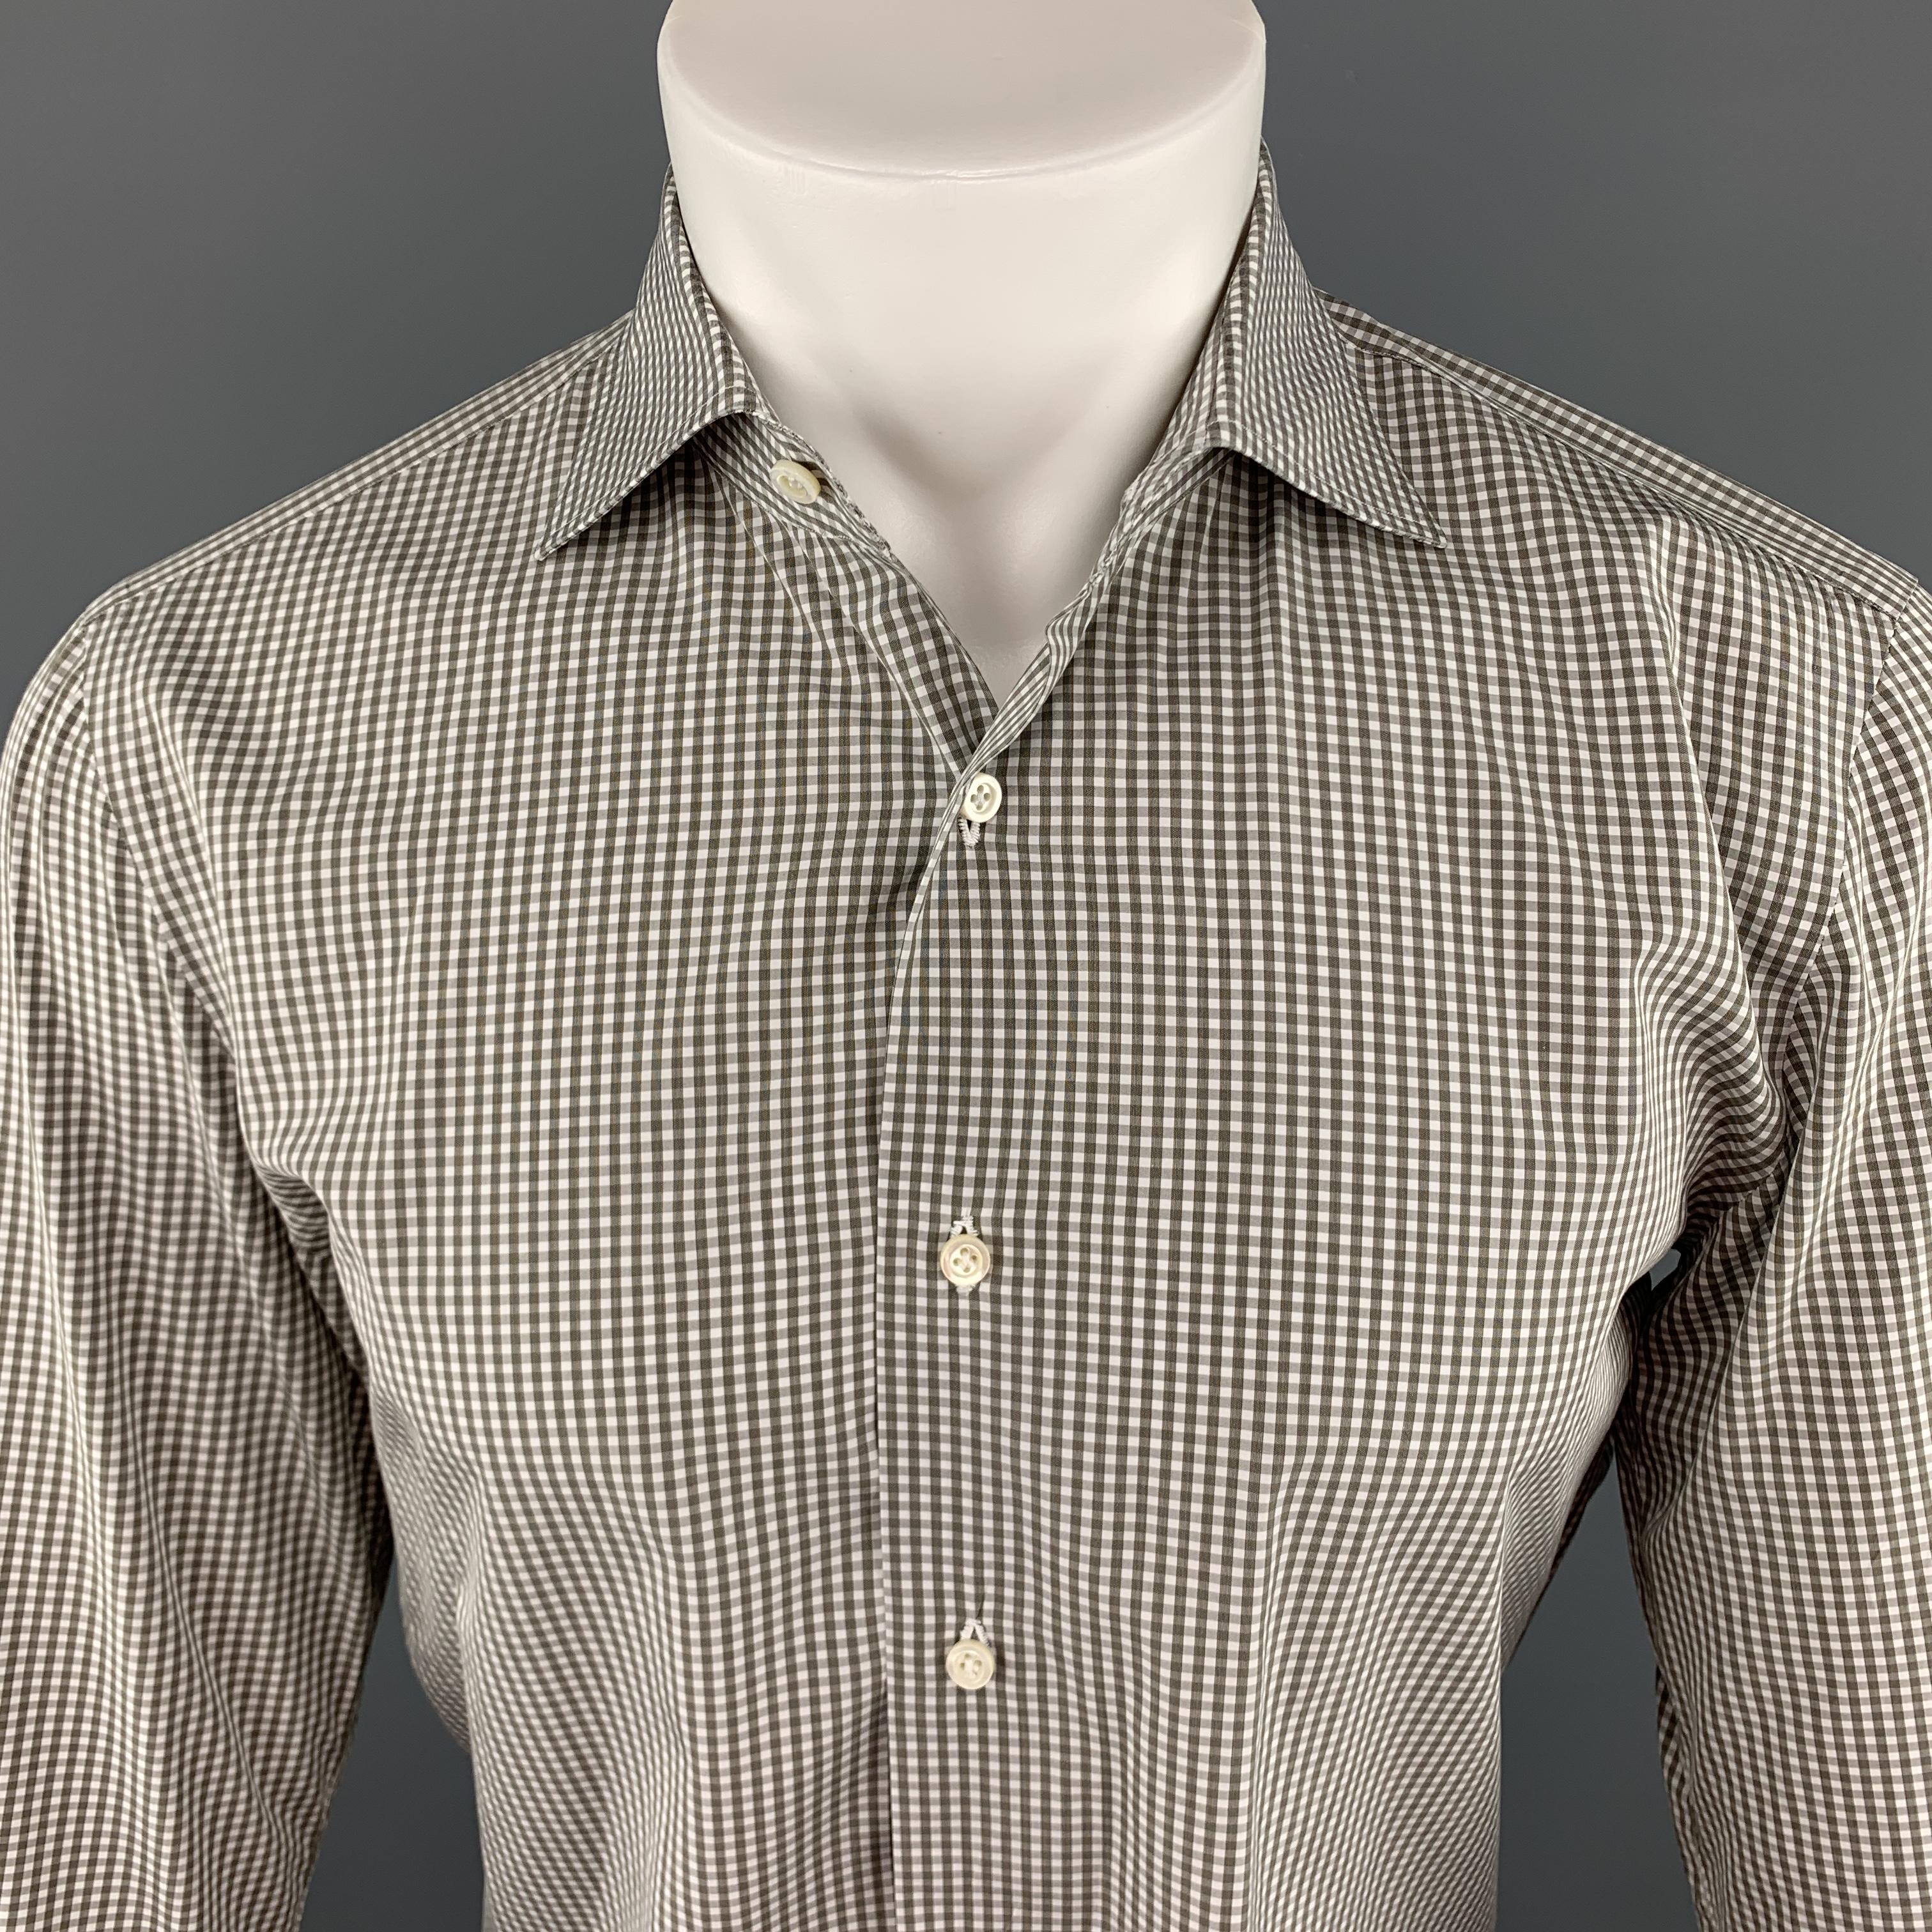 ISAIA Long Sleeve Shirt comes in white and olive tones in a checkered cotton material, with a  spread collar, buttoned cuffs, button up. Made in Italy.

Excellent Pre-Owned Condition.
 Marked: IT 39

Measurements:

Shoulder: 16 in. 
Chest: 42 in.